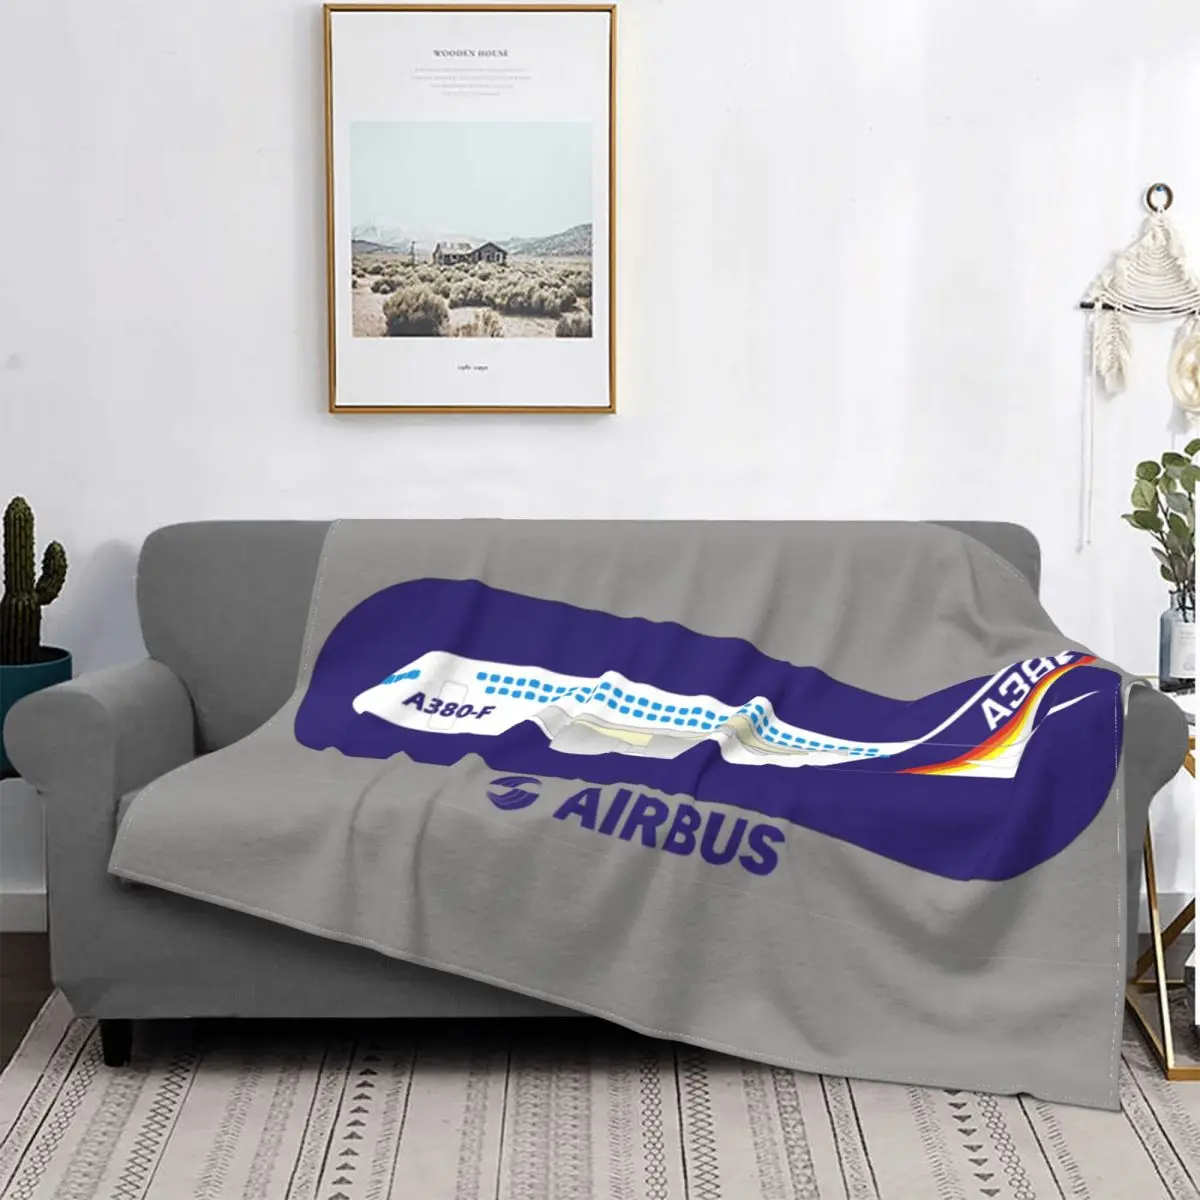 

Boeing Airbus A380 Blankets Sofa Cover Flannel Winter Portable Lightweight Throw Blanket for Bedding Travel Bedspreads